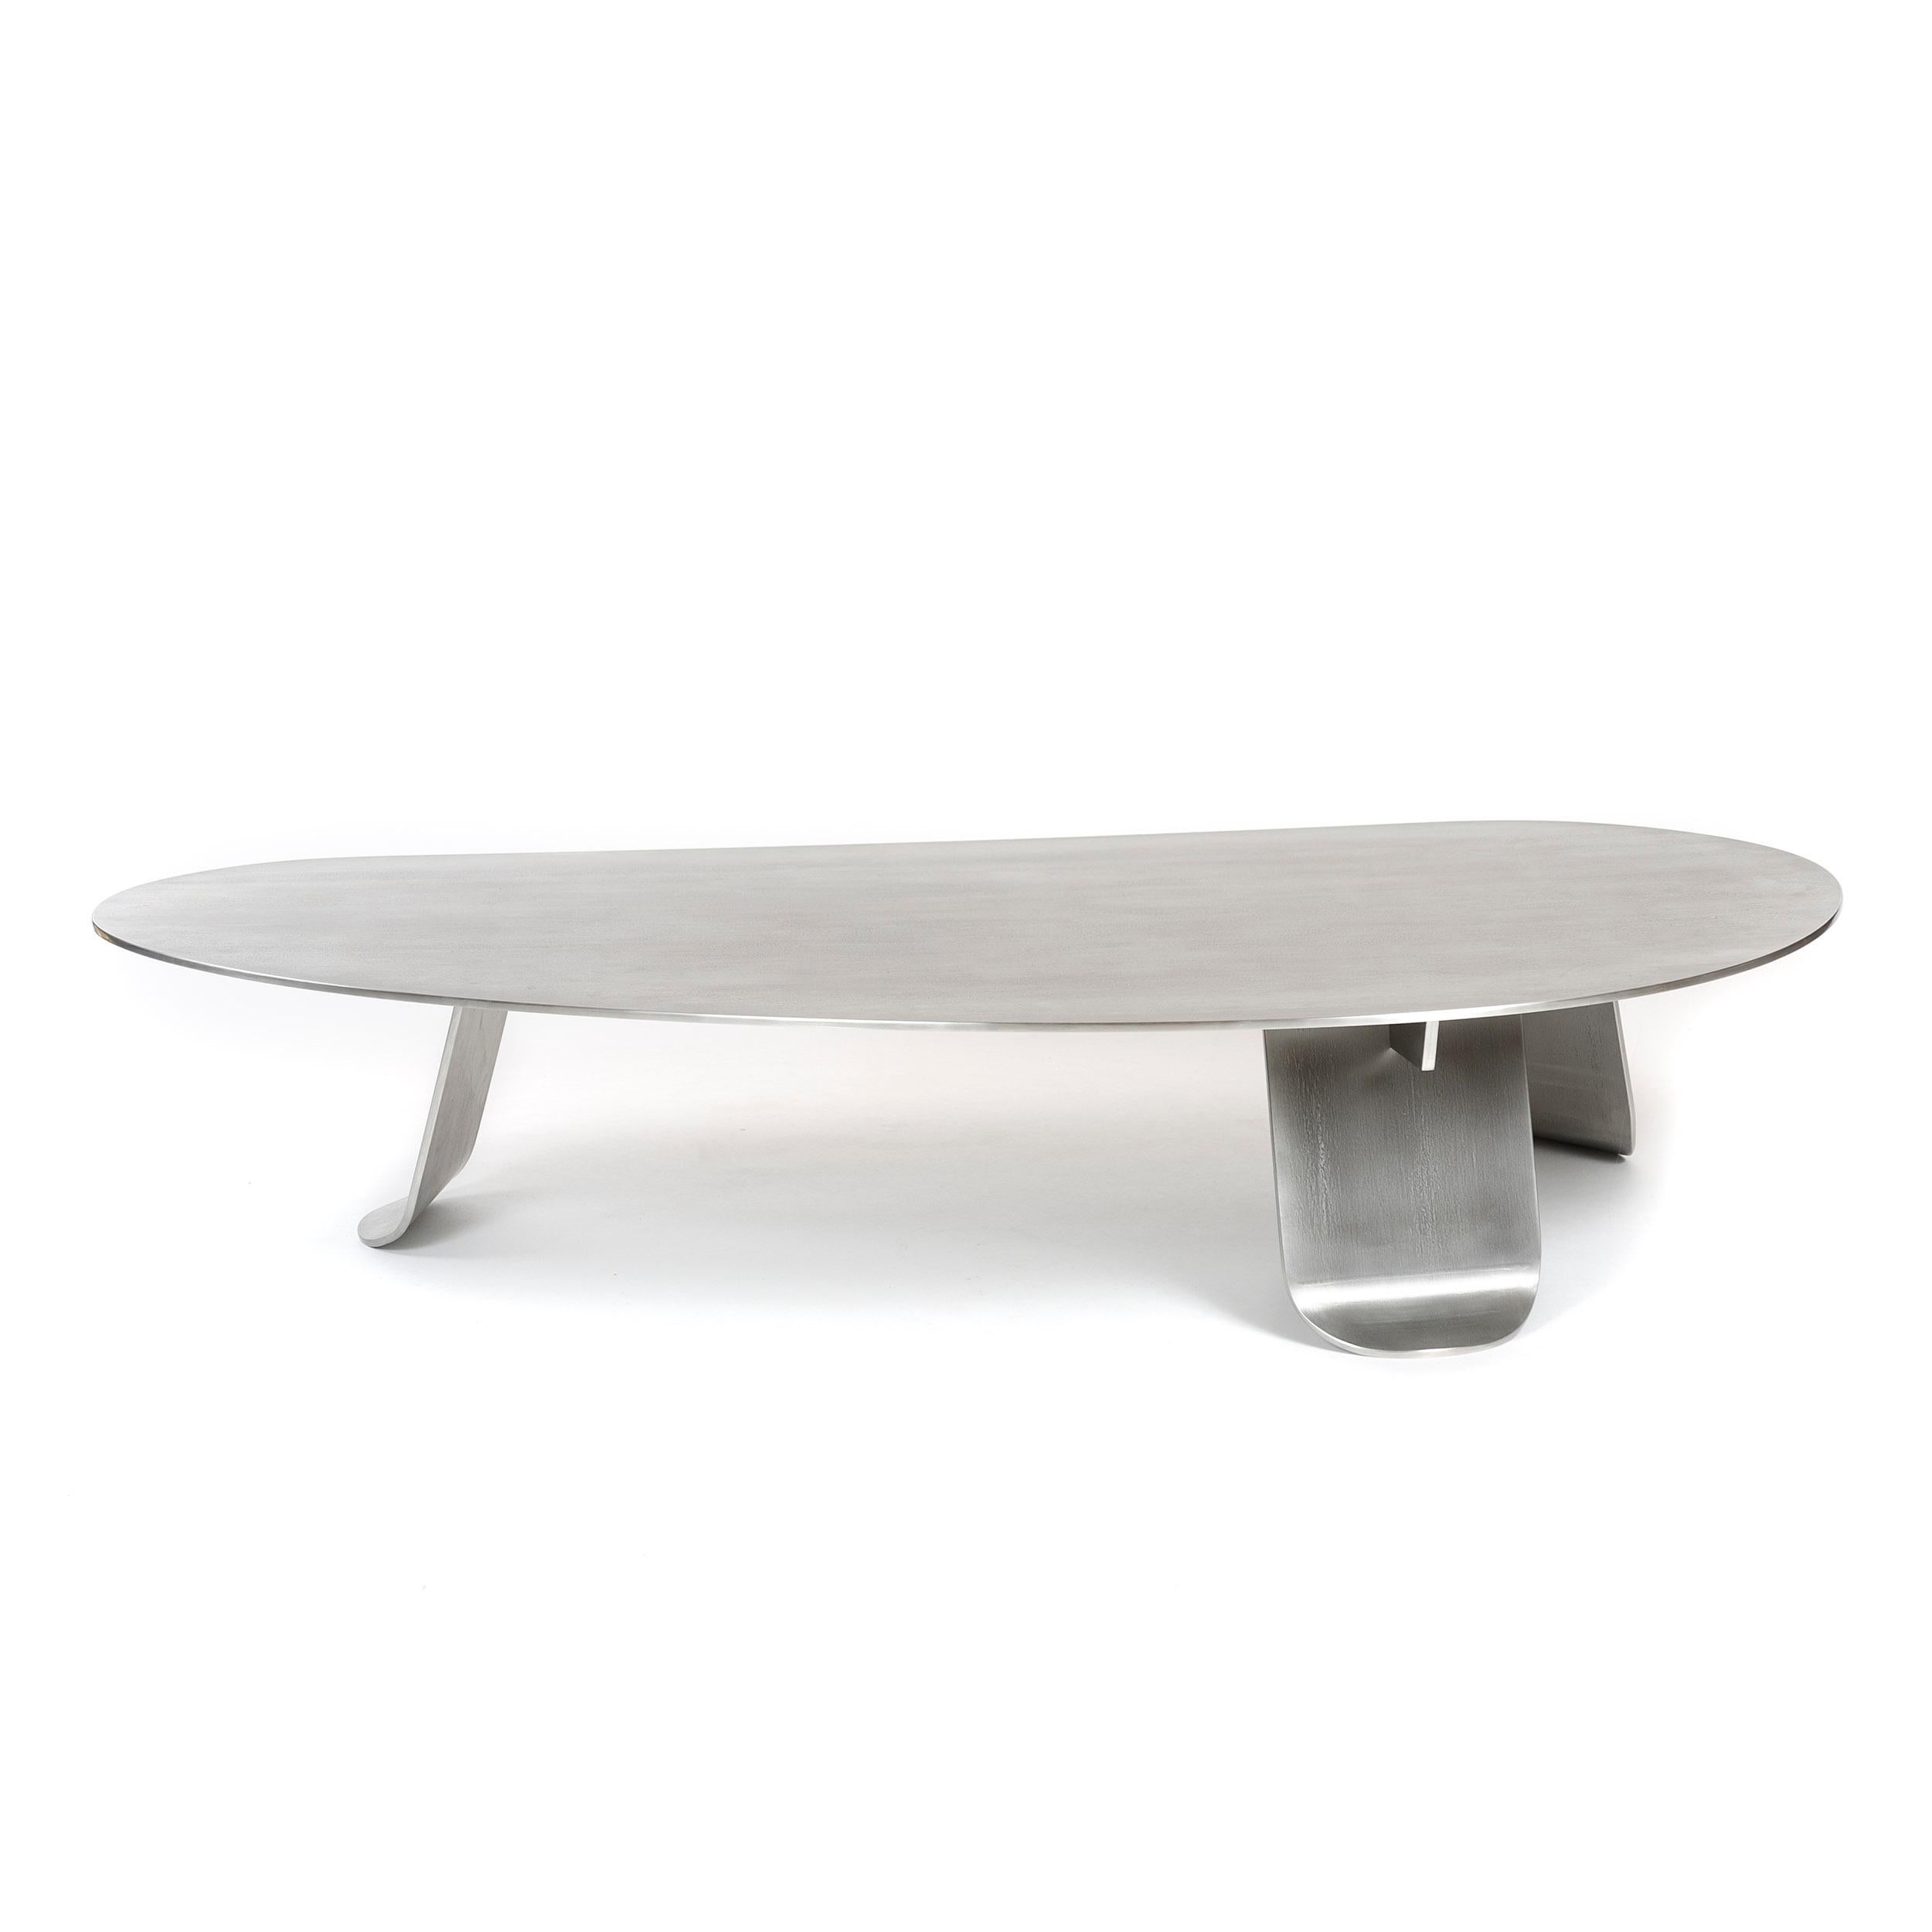 American WYETH Chrysalis Table No. 1 in Natural Grain Stainless Steel For Sale